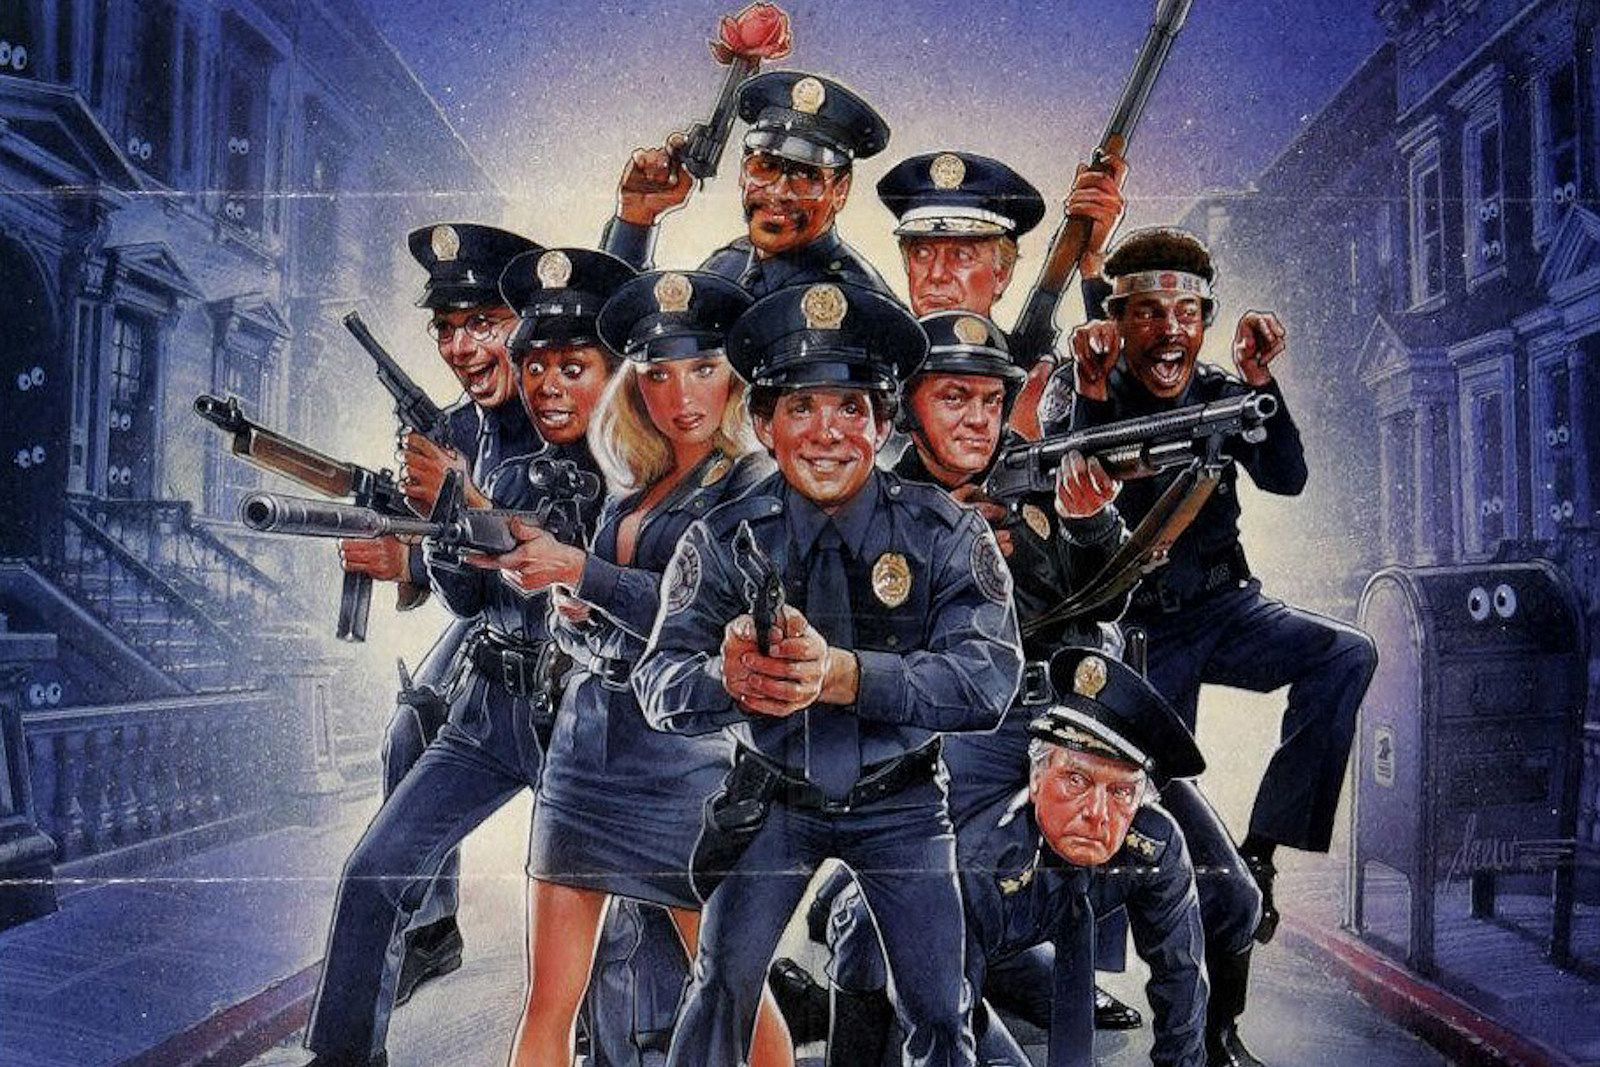 How 'Police Academy 5' Limped Along Without Steve Guttenberg